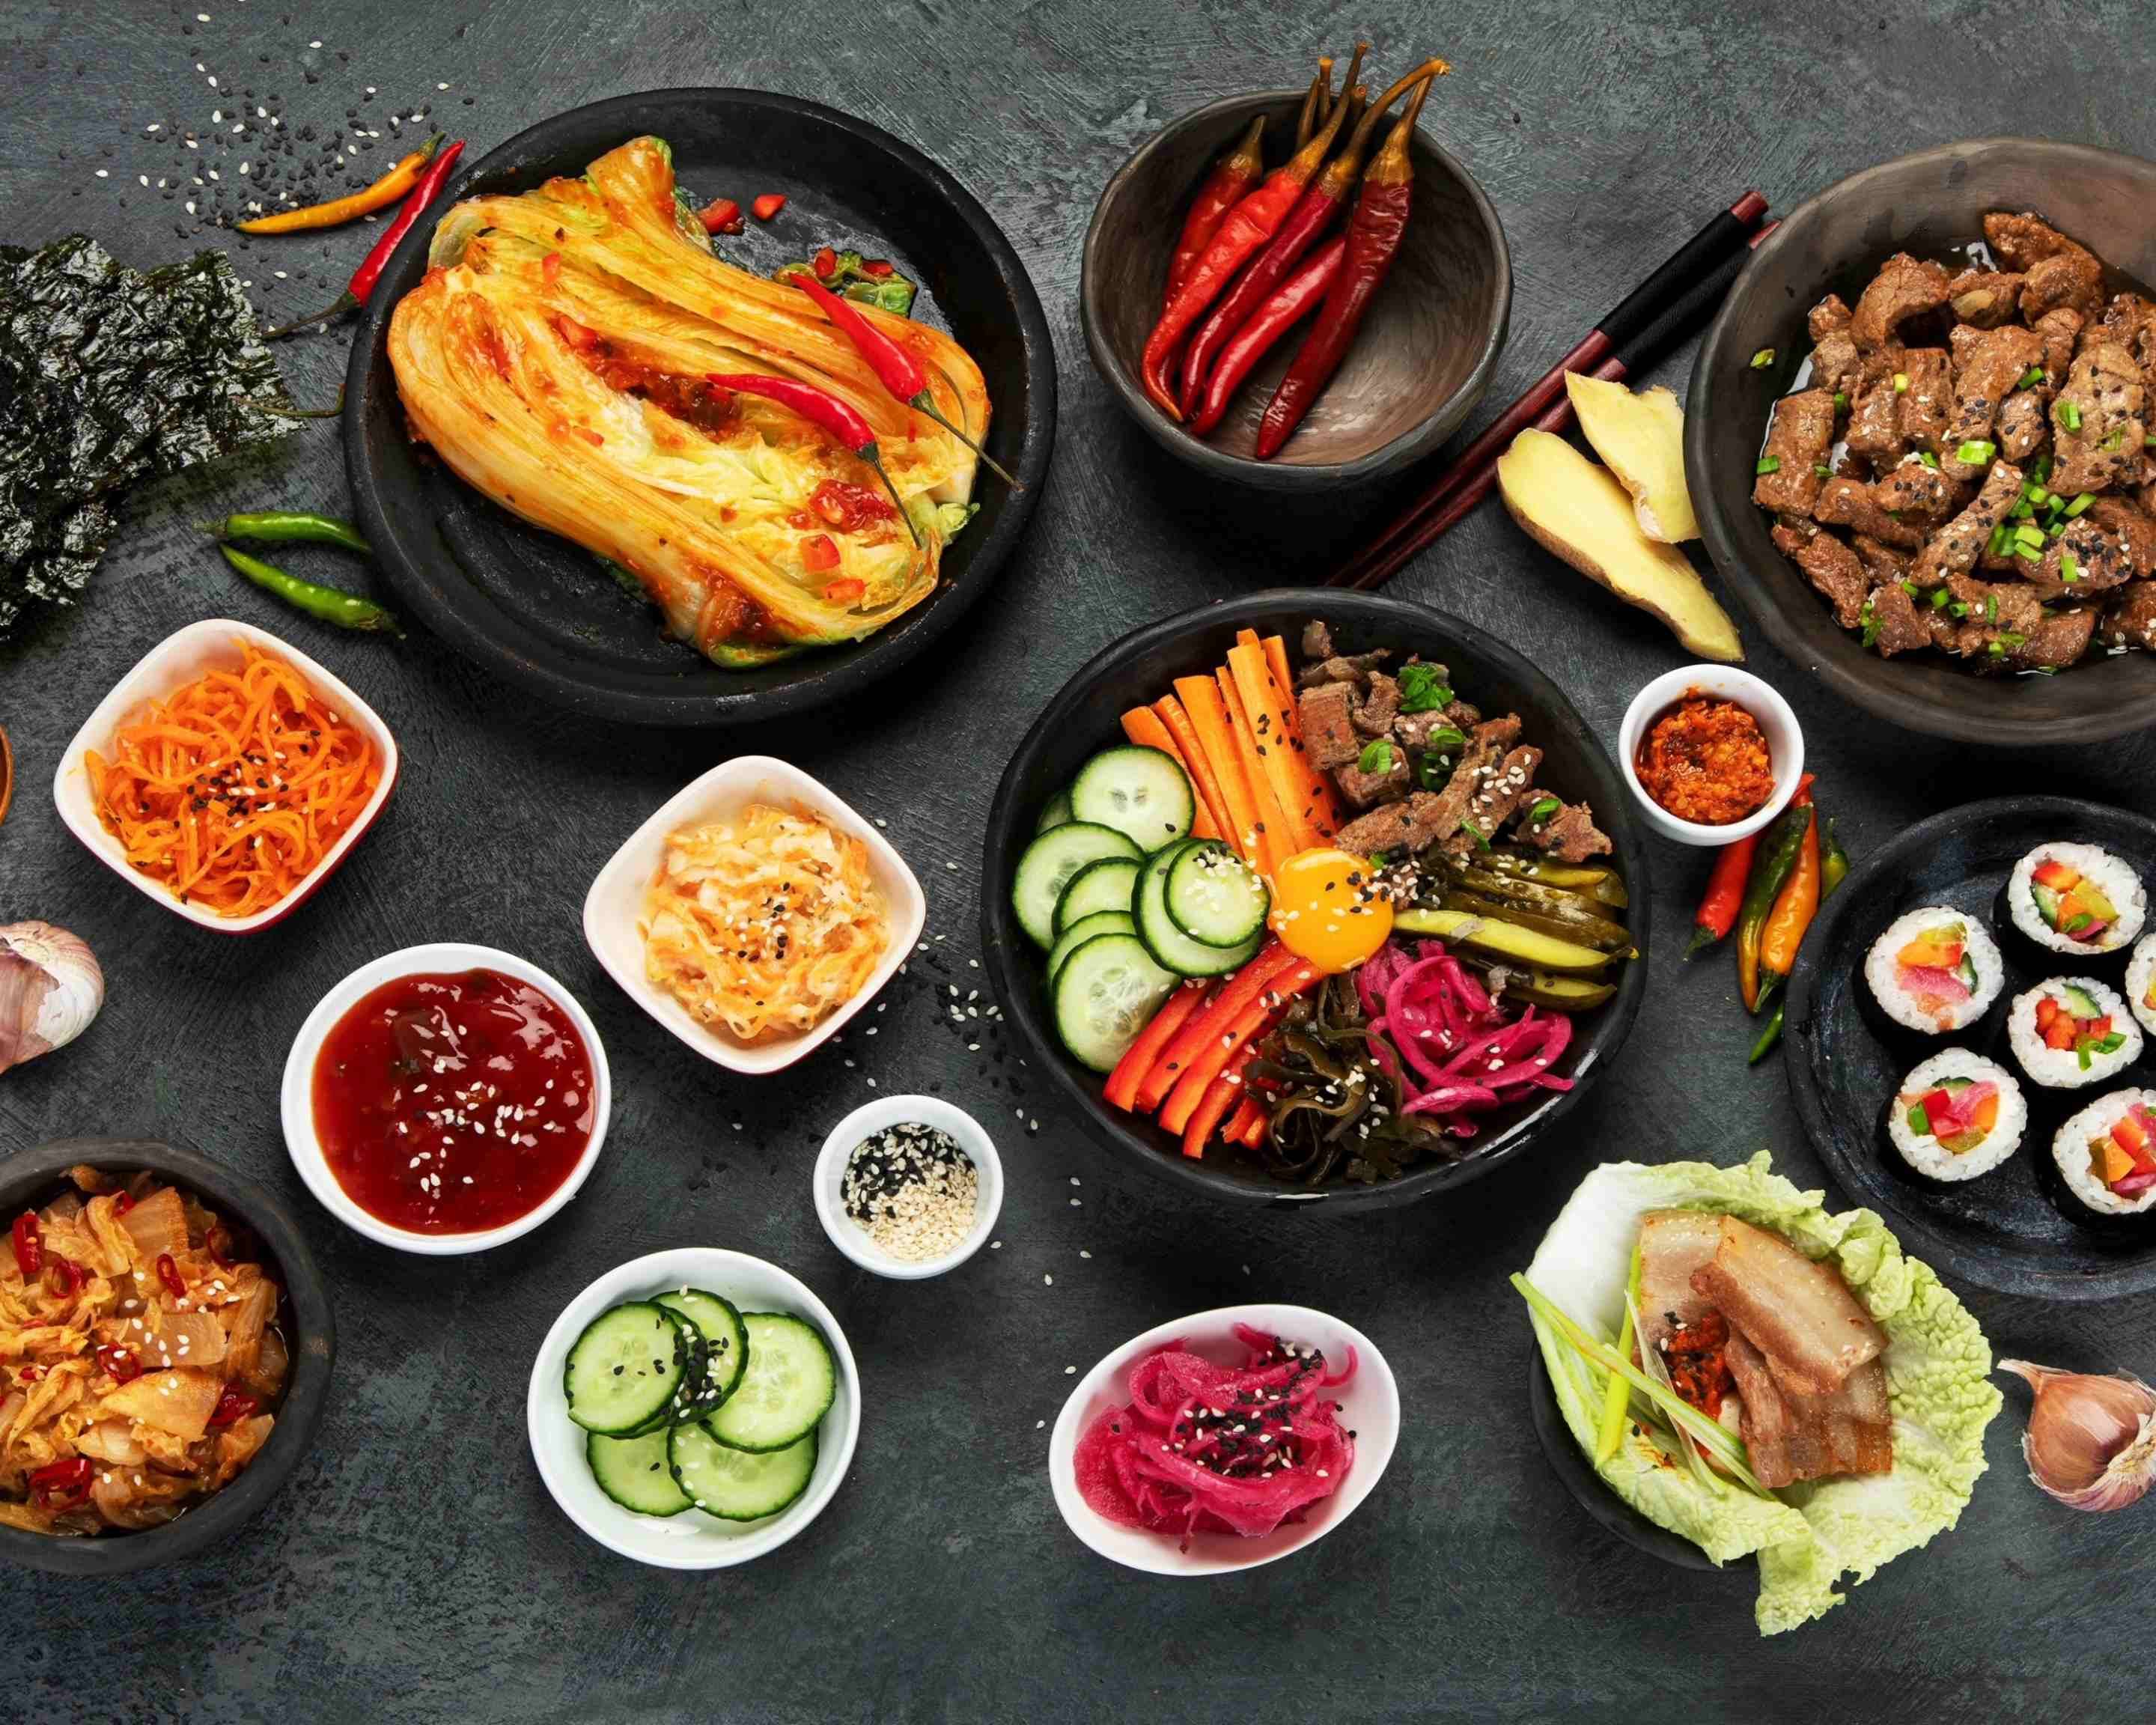 south korean traditional foods